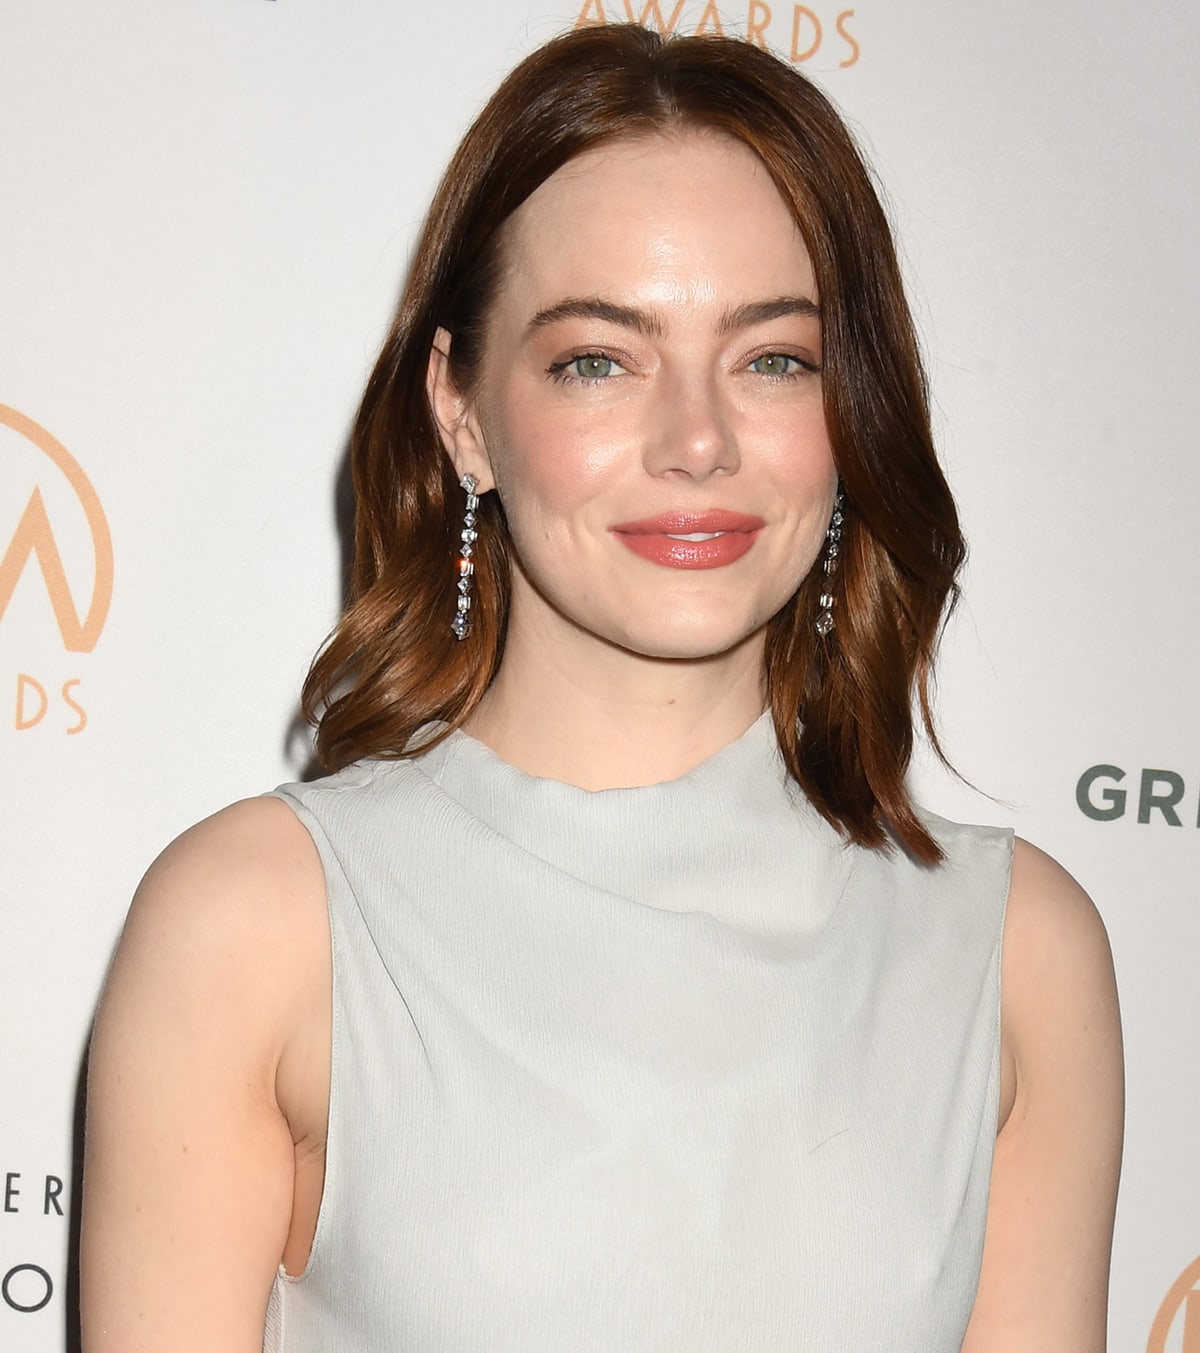 Emma Stone opts for a radiant look with rosy cheeks and lips and styles her shoulder-length red hair in center-parted soft curls